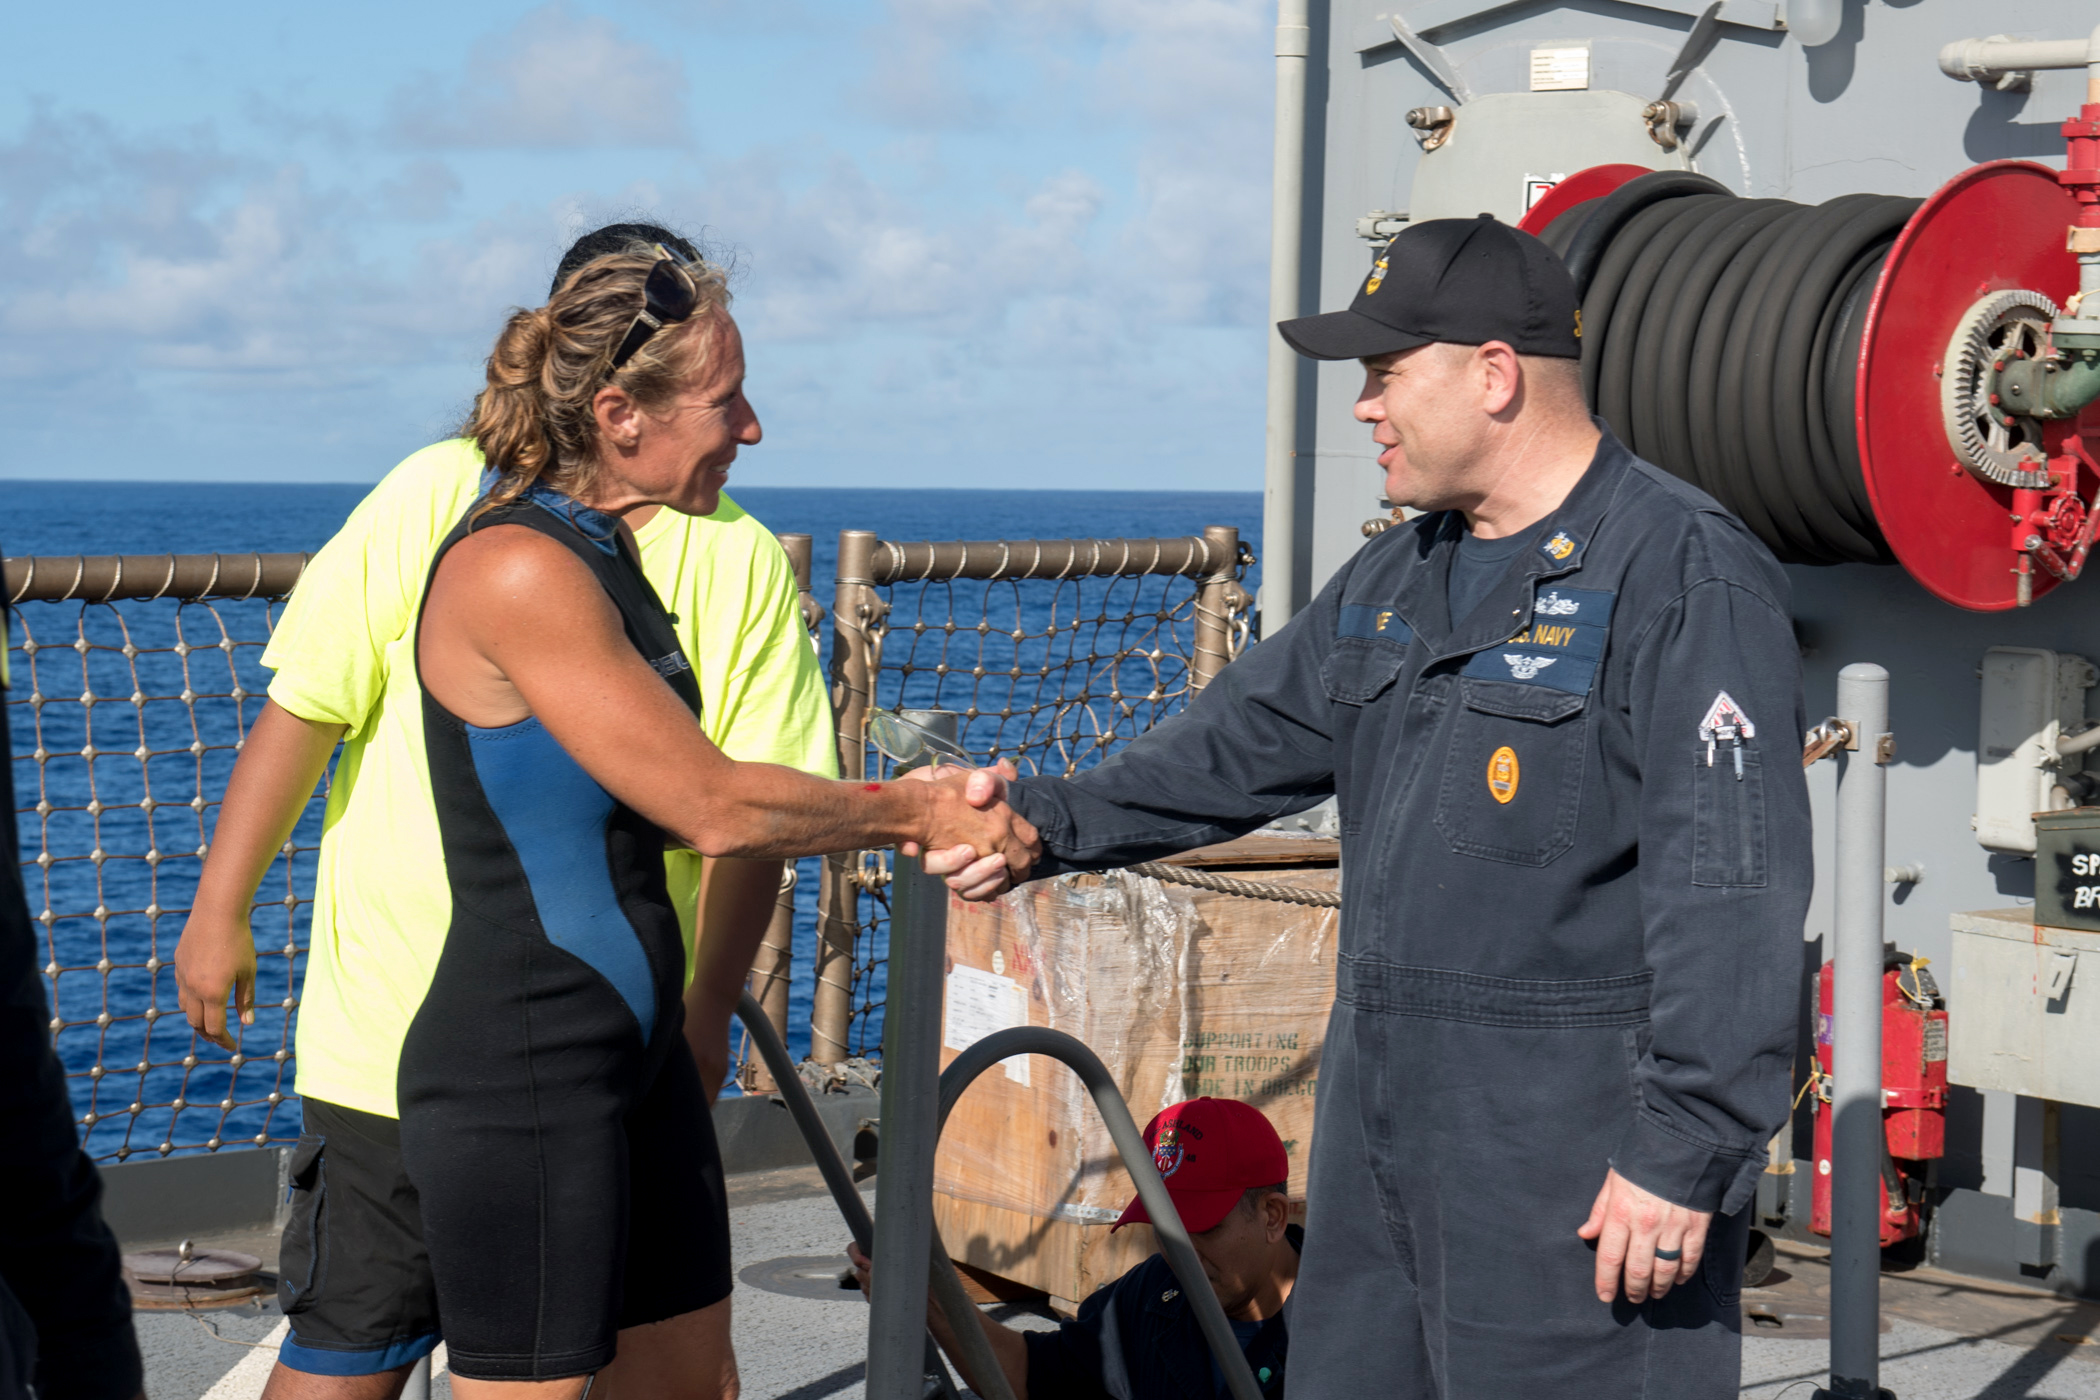 PHOTO: USS Ashland (LSD 48) Command Master Chief Gary Wise welcomes aboard Jennifer Appel, an American mariner who had received assistance from Ashland crew members, Oct. 25, 2017.